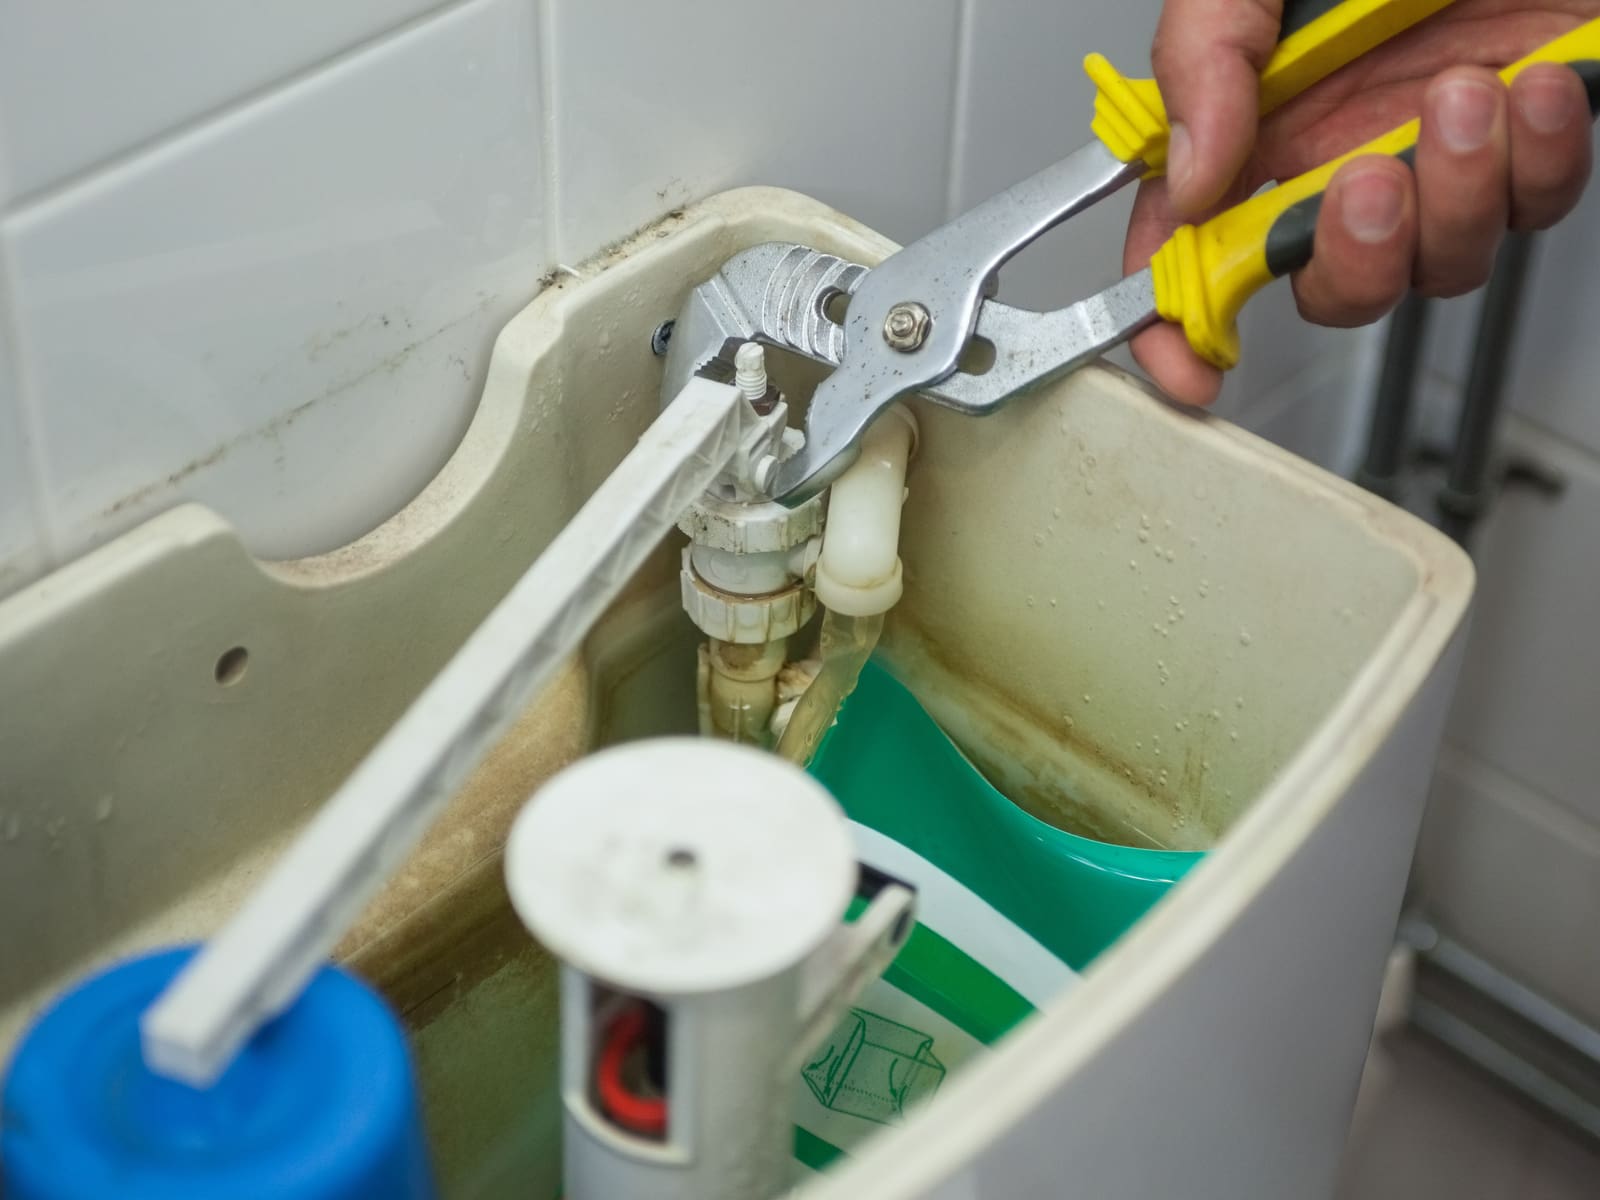 Close up of hand repairing toilet with pliers